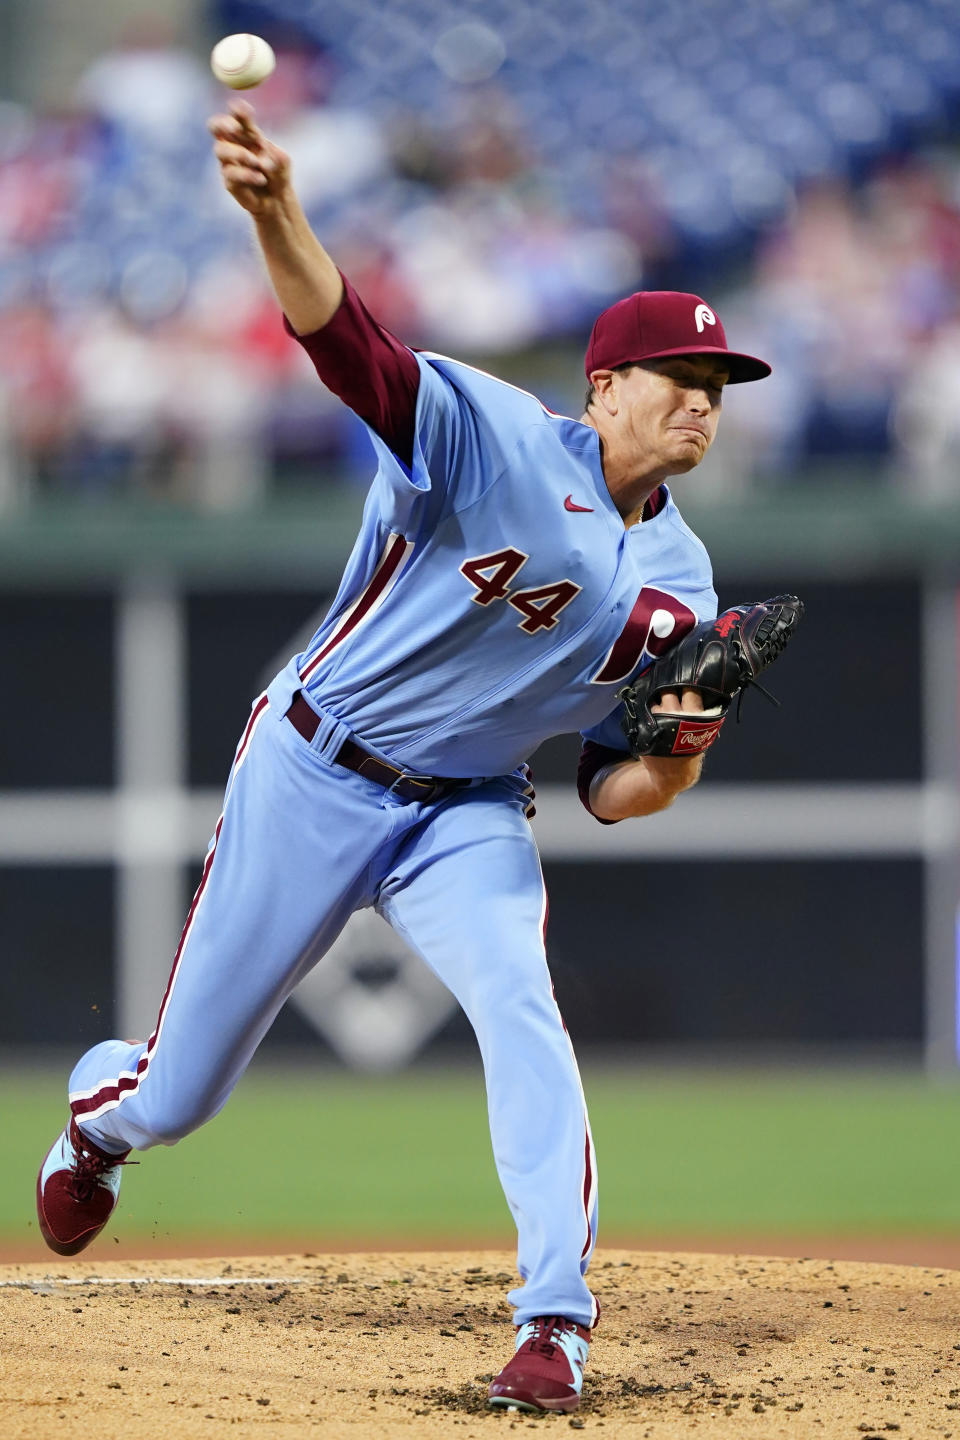 Philadelphia Phillies' Kyle Gibson pitches during the second inning of a baseball game against the Miami Marlins, Thursday, Sept. 8, 2022, in Philadelphia. (AP Photo/Matt Slocum)